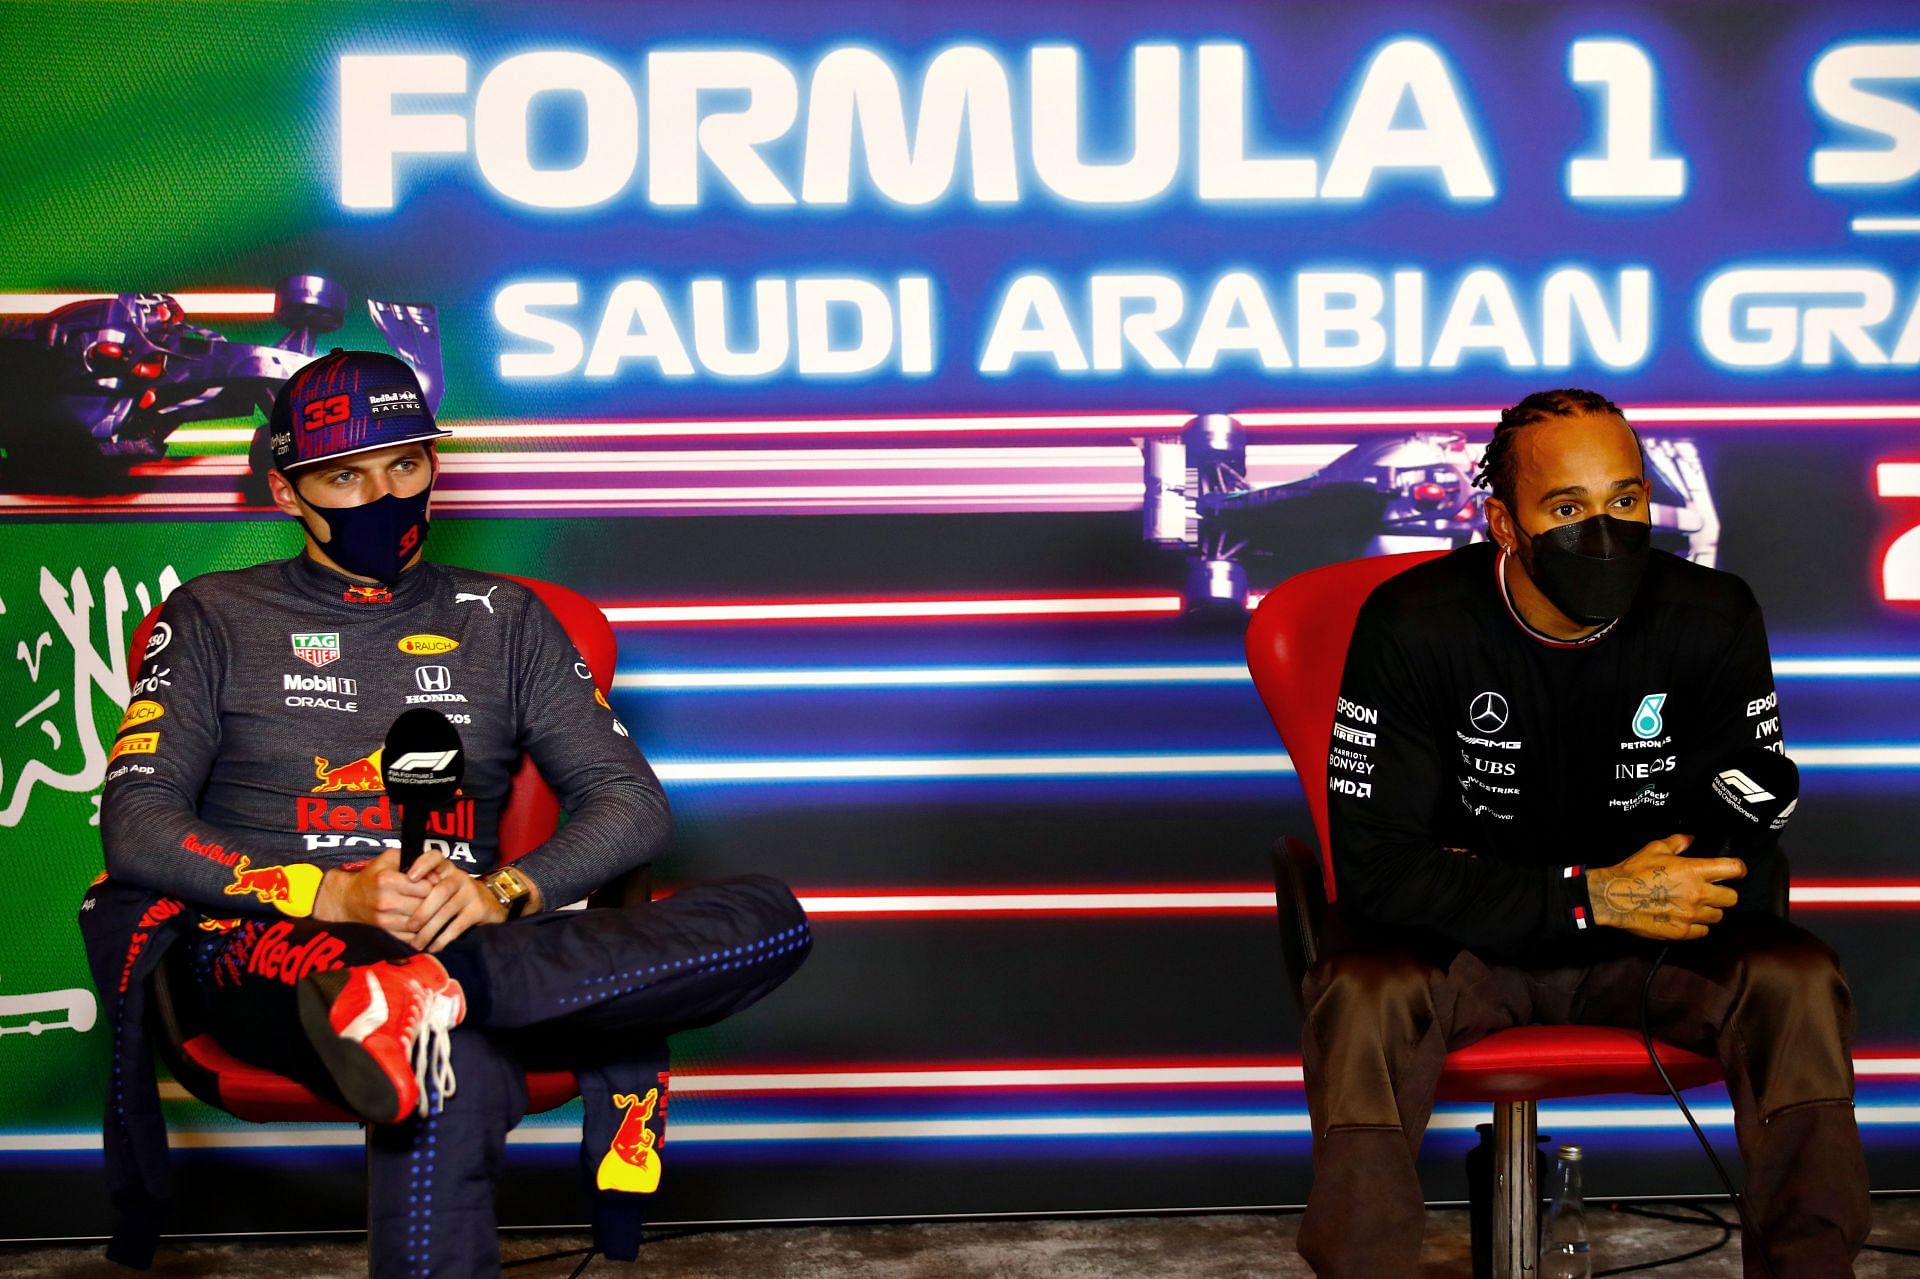 The 2021 F1 Drivers Championship to be decided at the 2021 Abu Dhabi Grand Prix